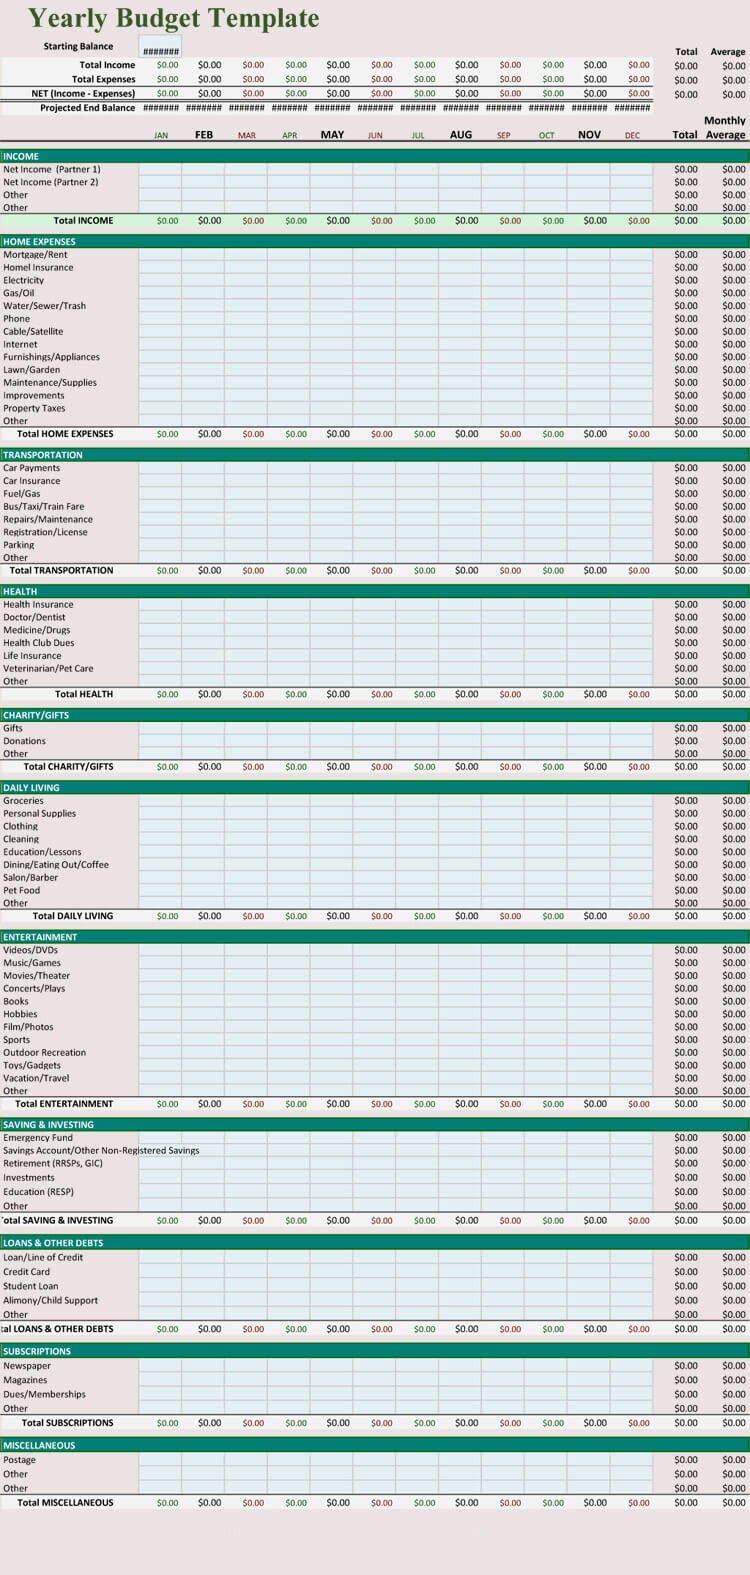 excel template yearly plan free download
 5 Free Personal Yearly Budget Templates for Excel - excel template yearly plan free download